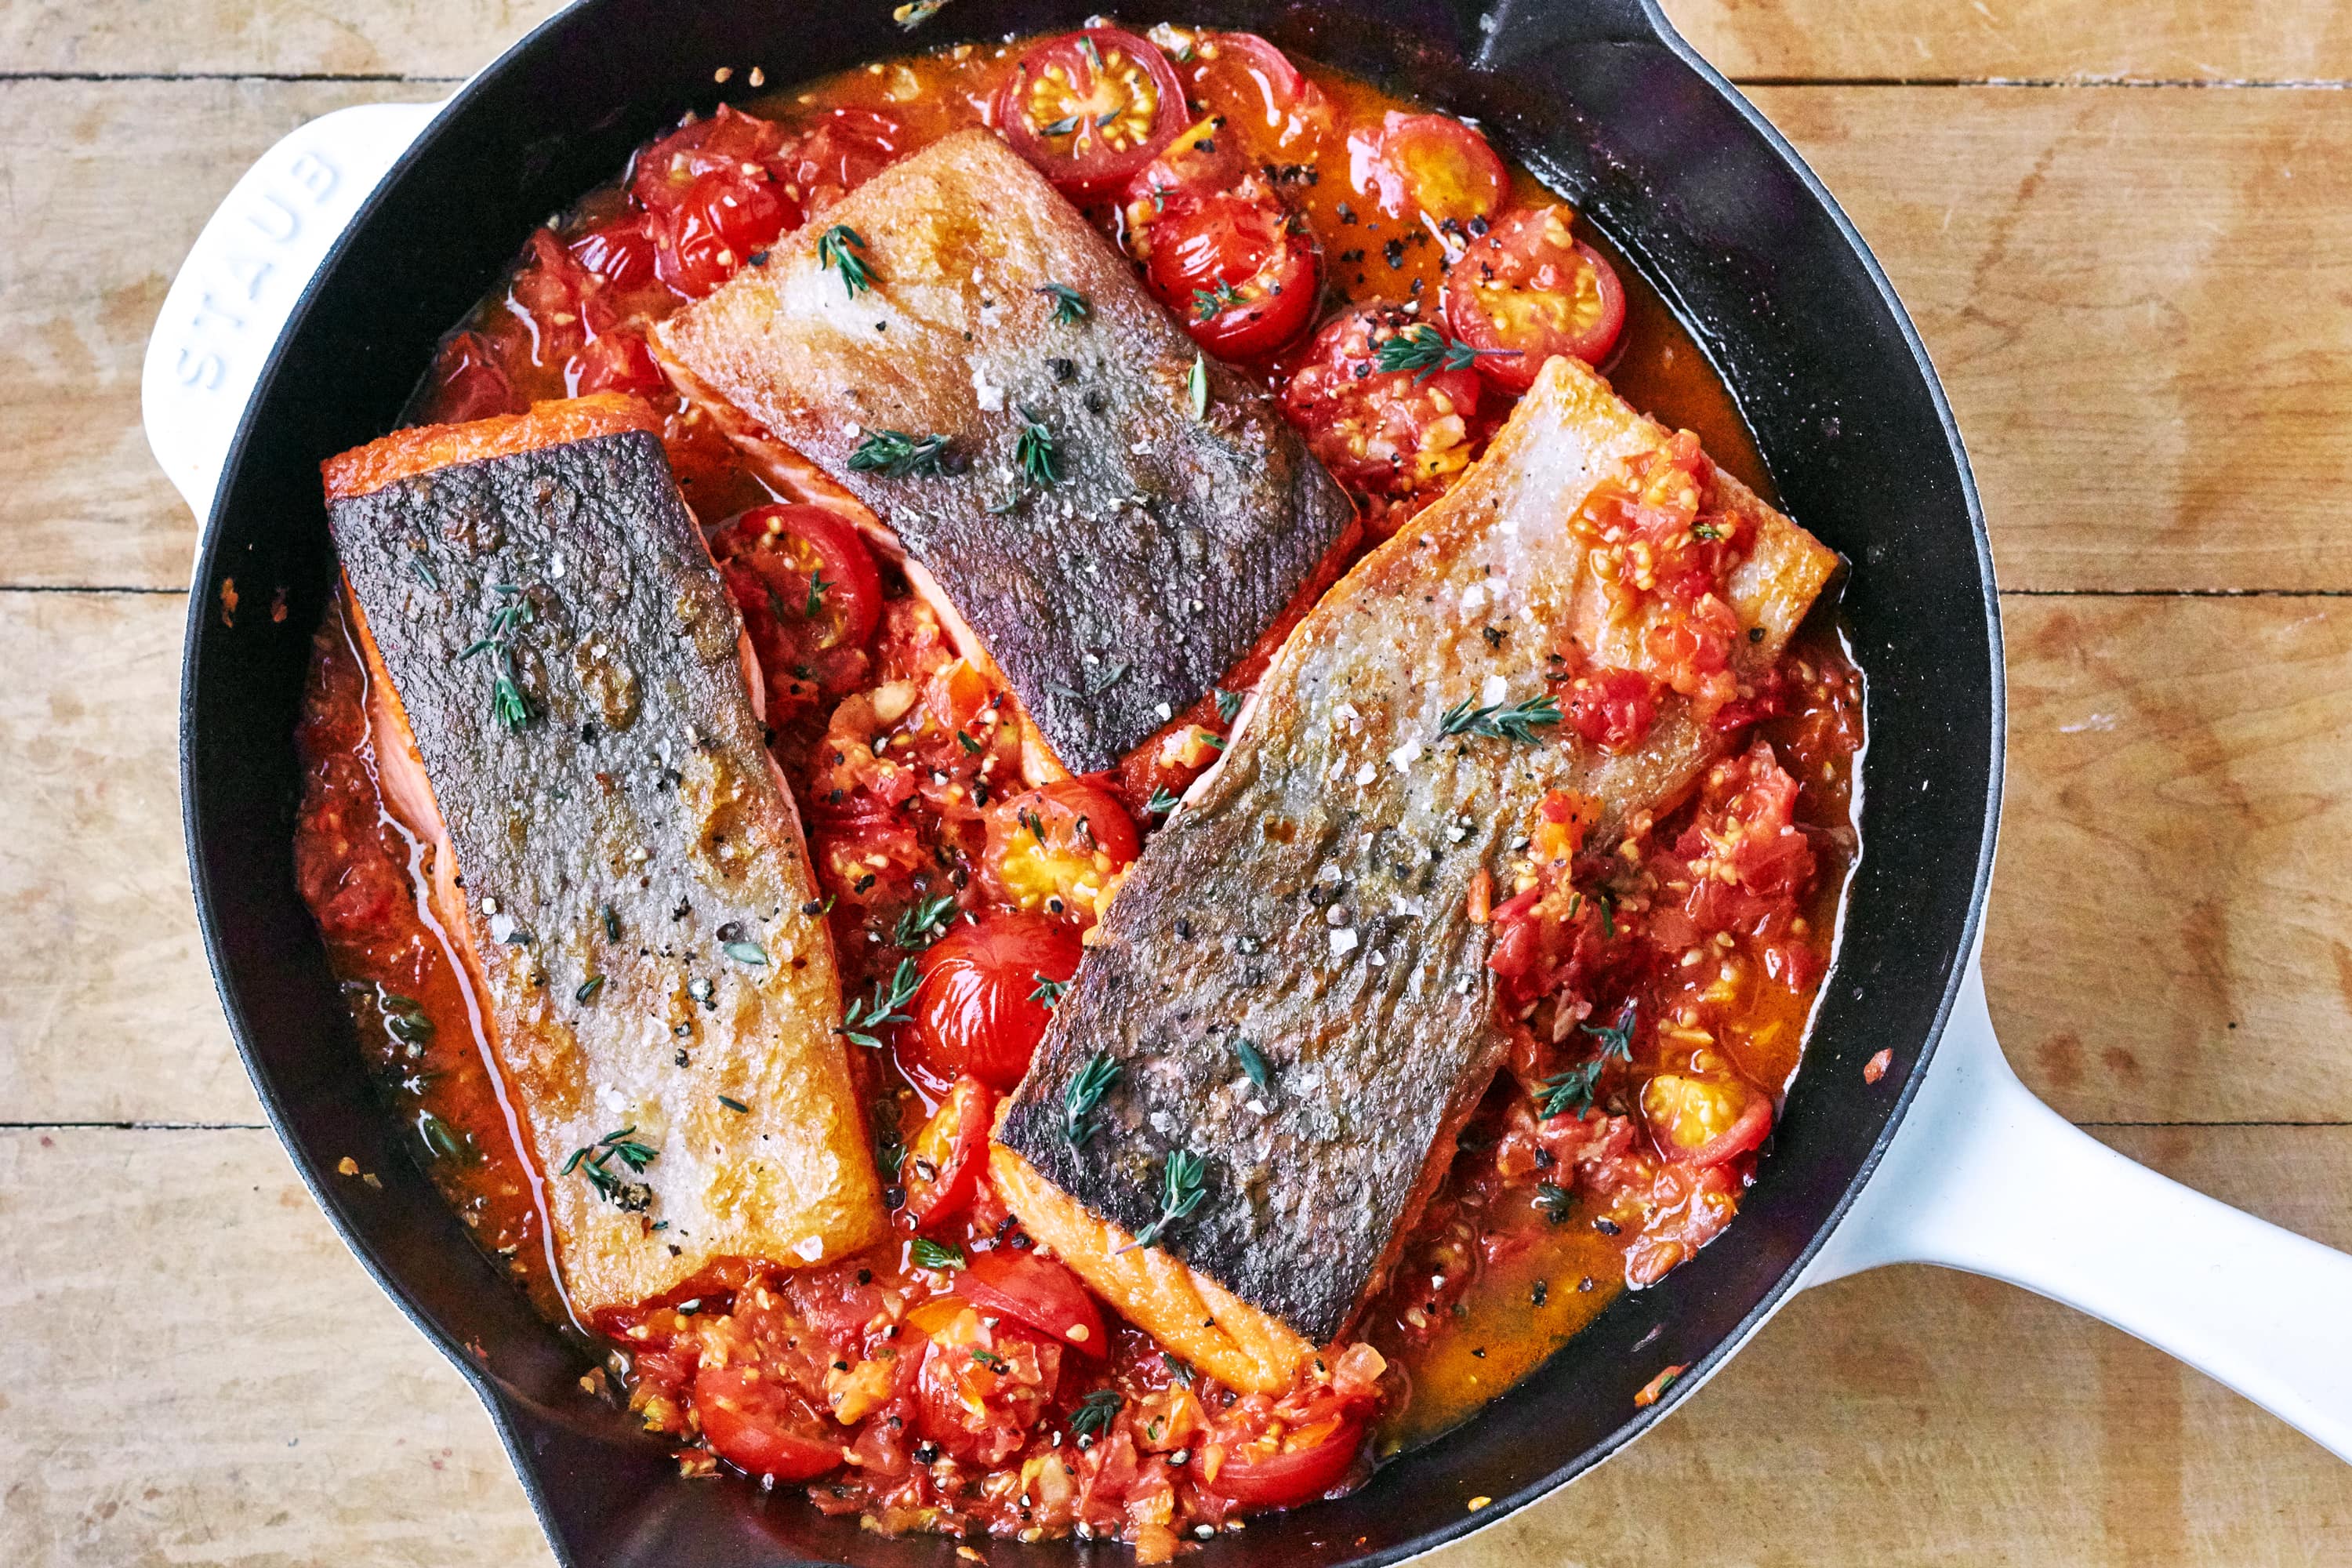 Healthy Benefits Of Fish Dinner